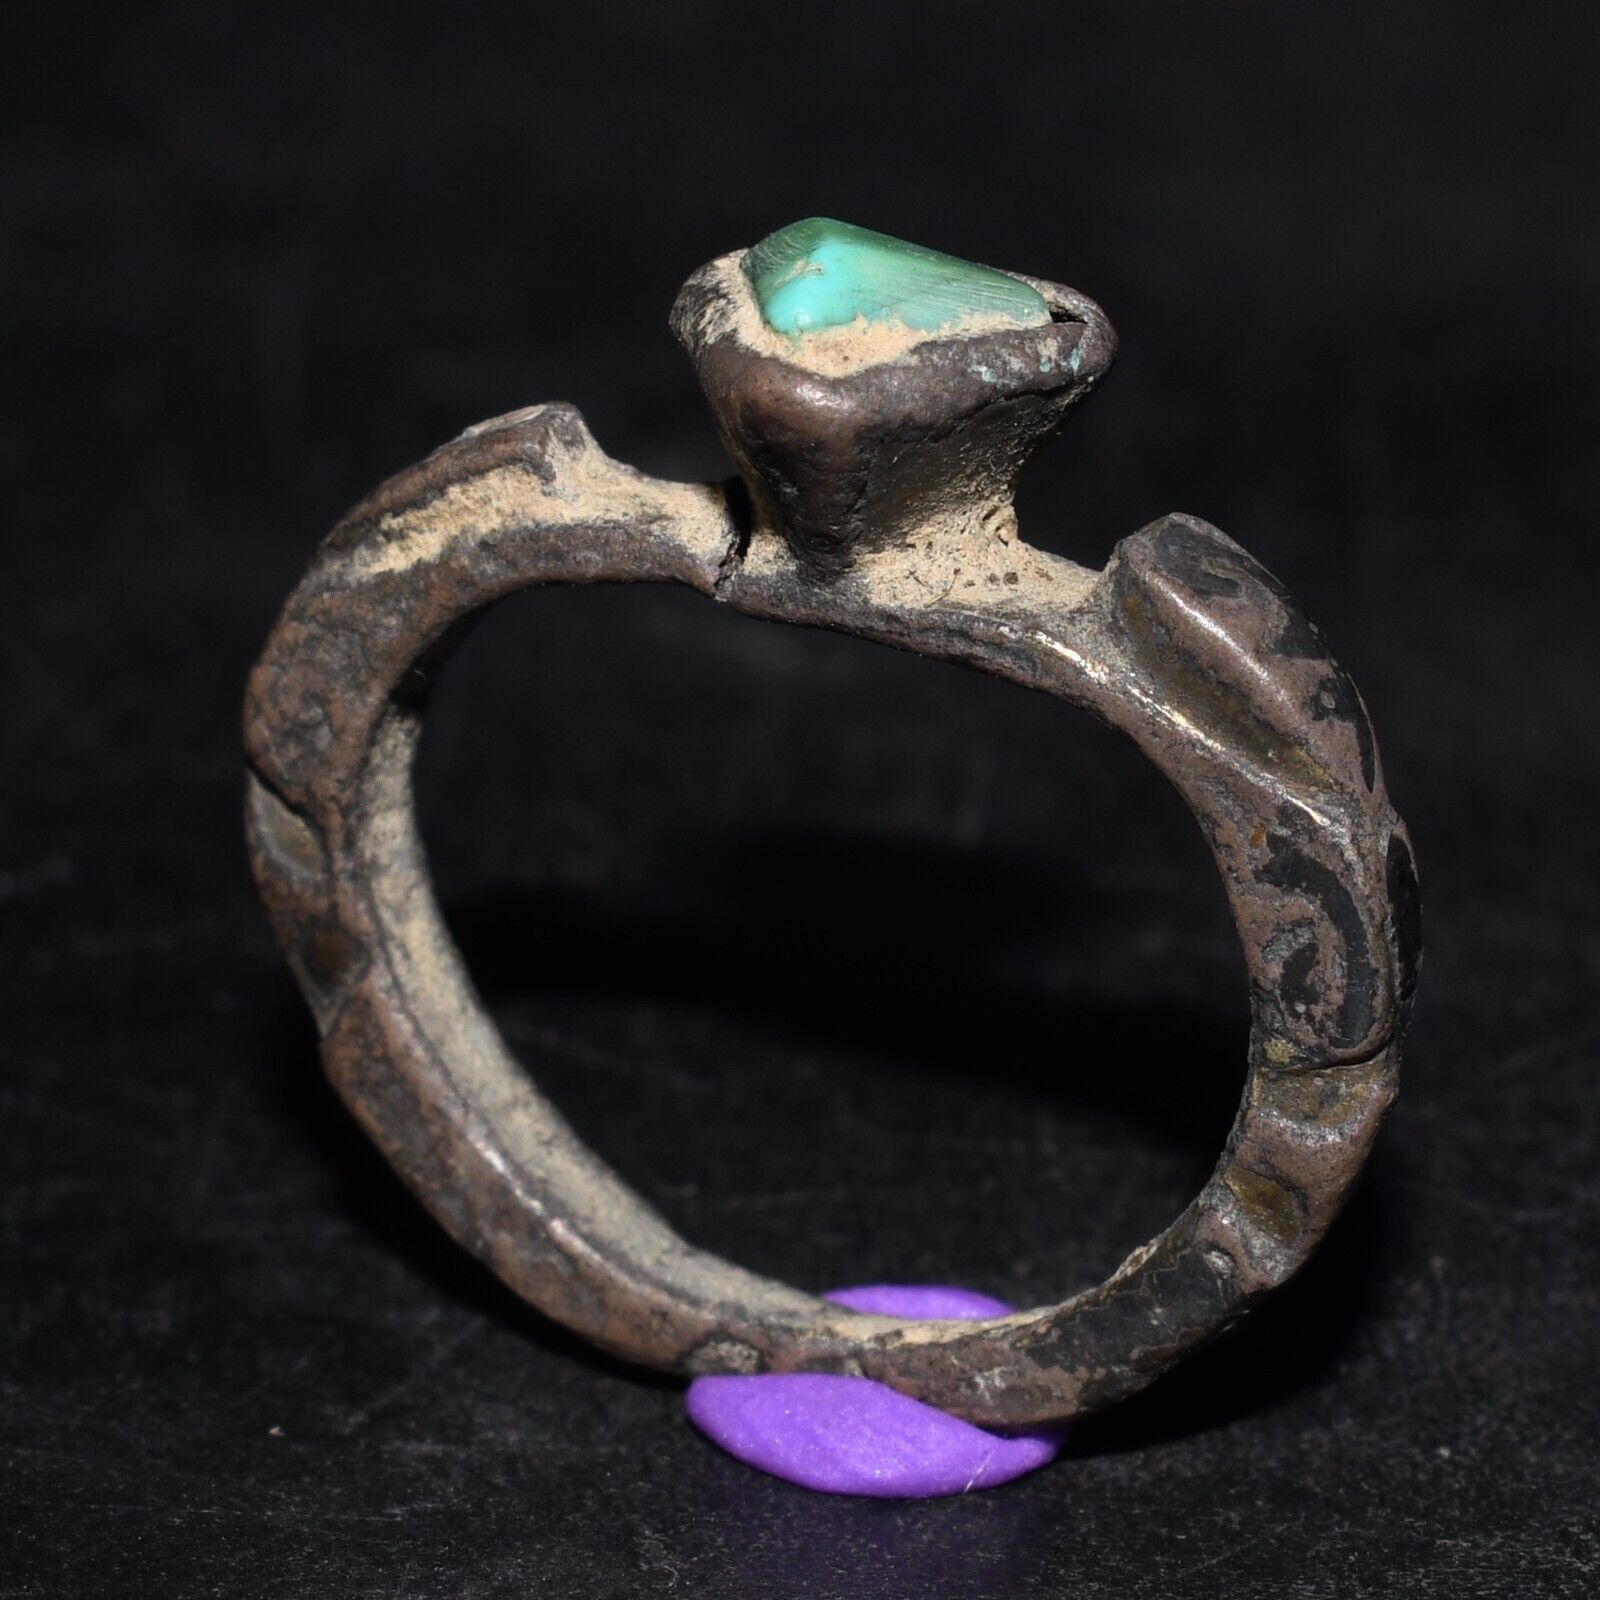 Genuine Ancient Roman Mix Silver Ring with Triangle Turquoise Bezel 1st Century